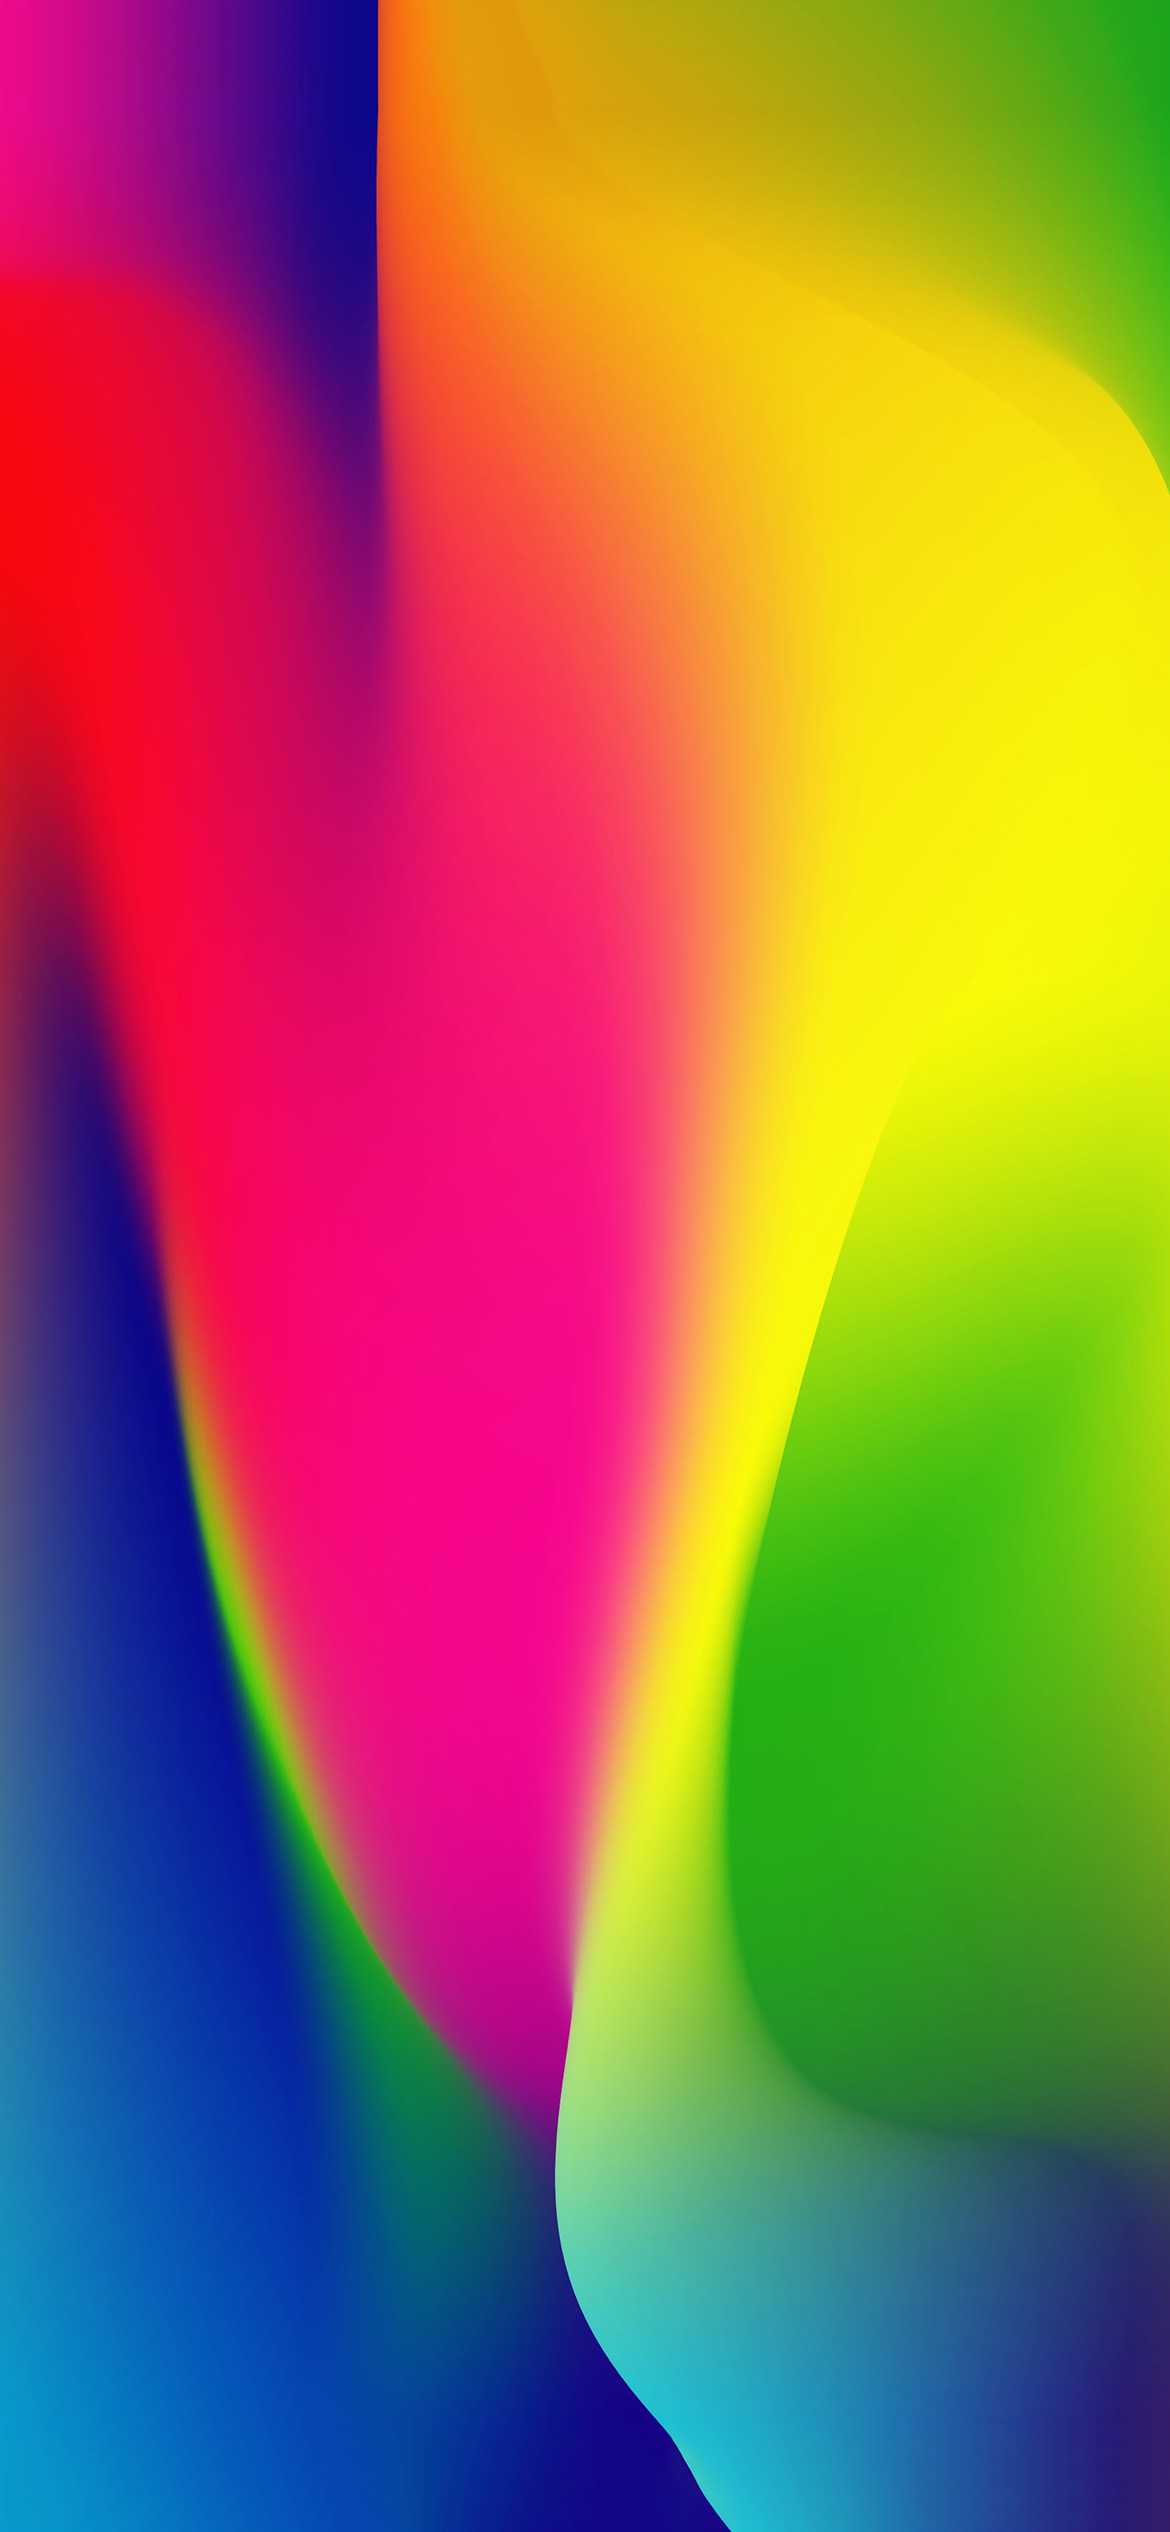 IOS 15 Wallpapers - iXpap